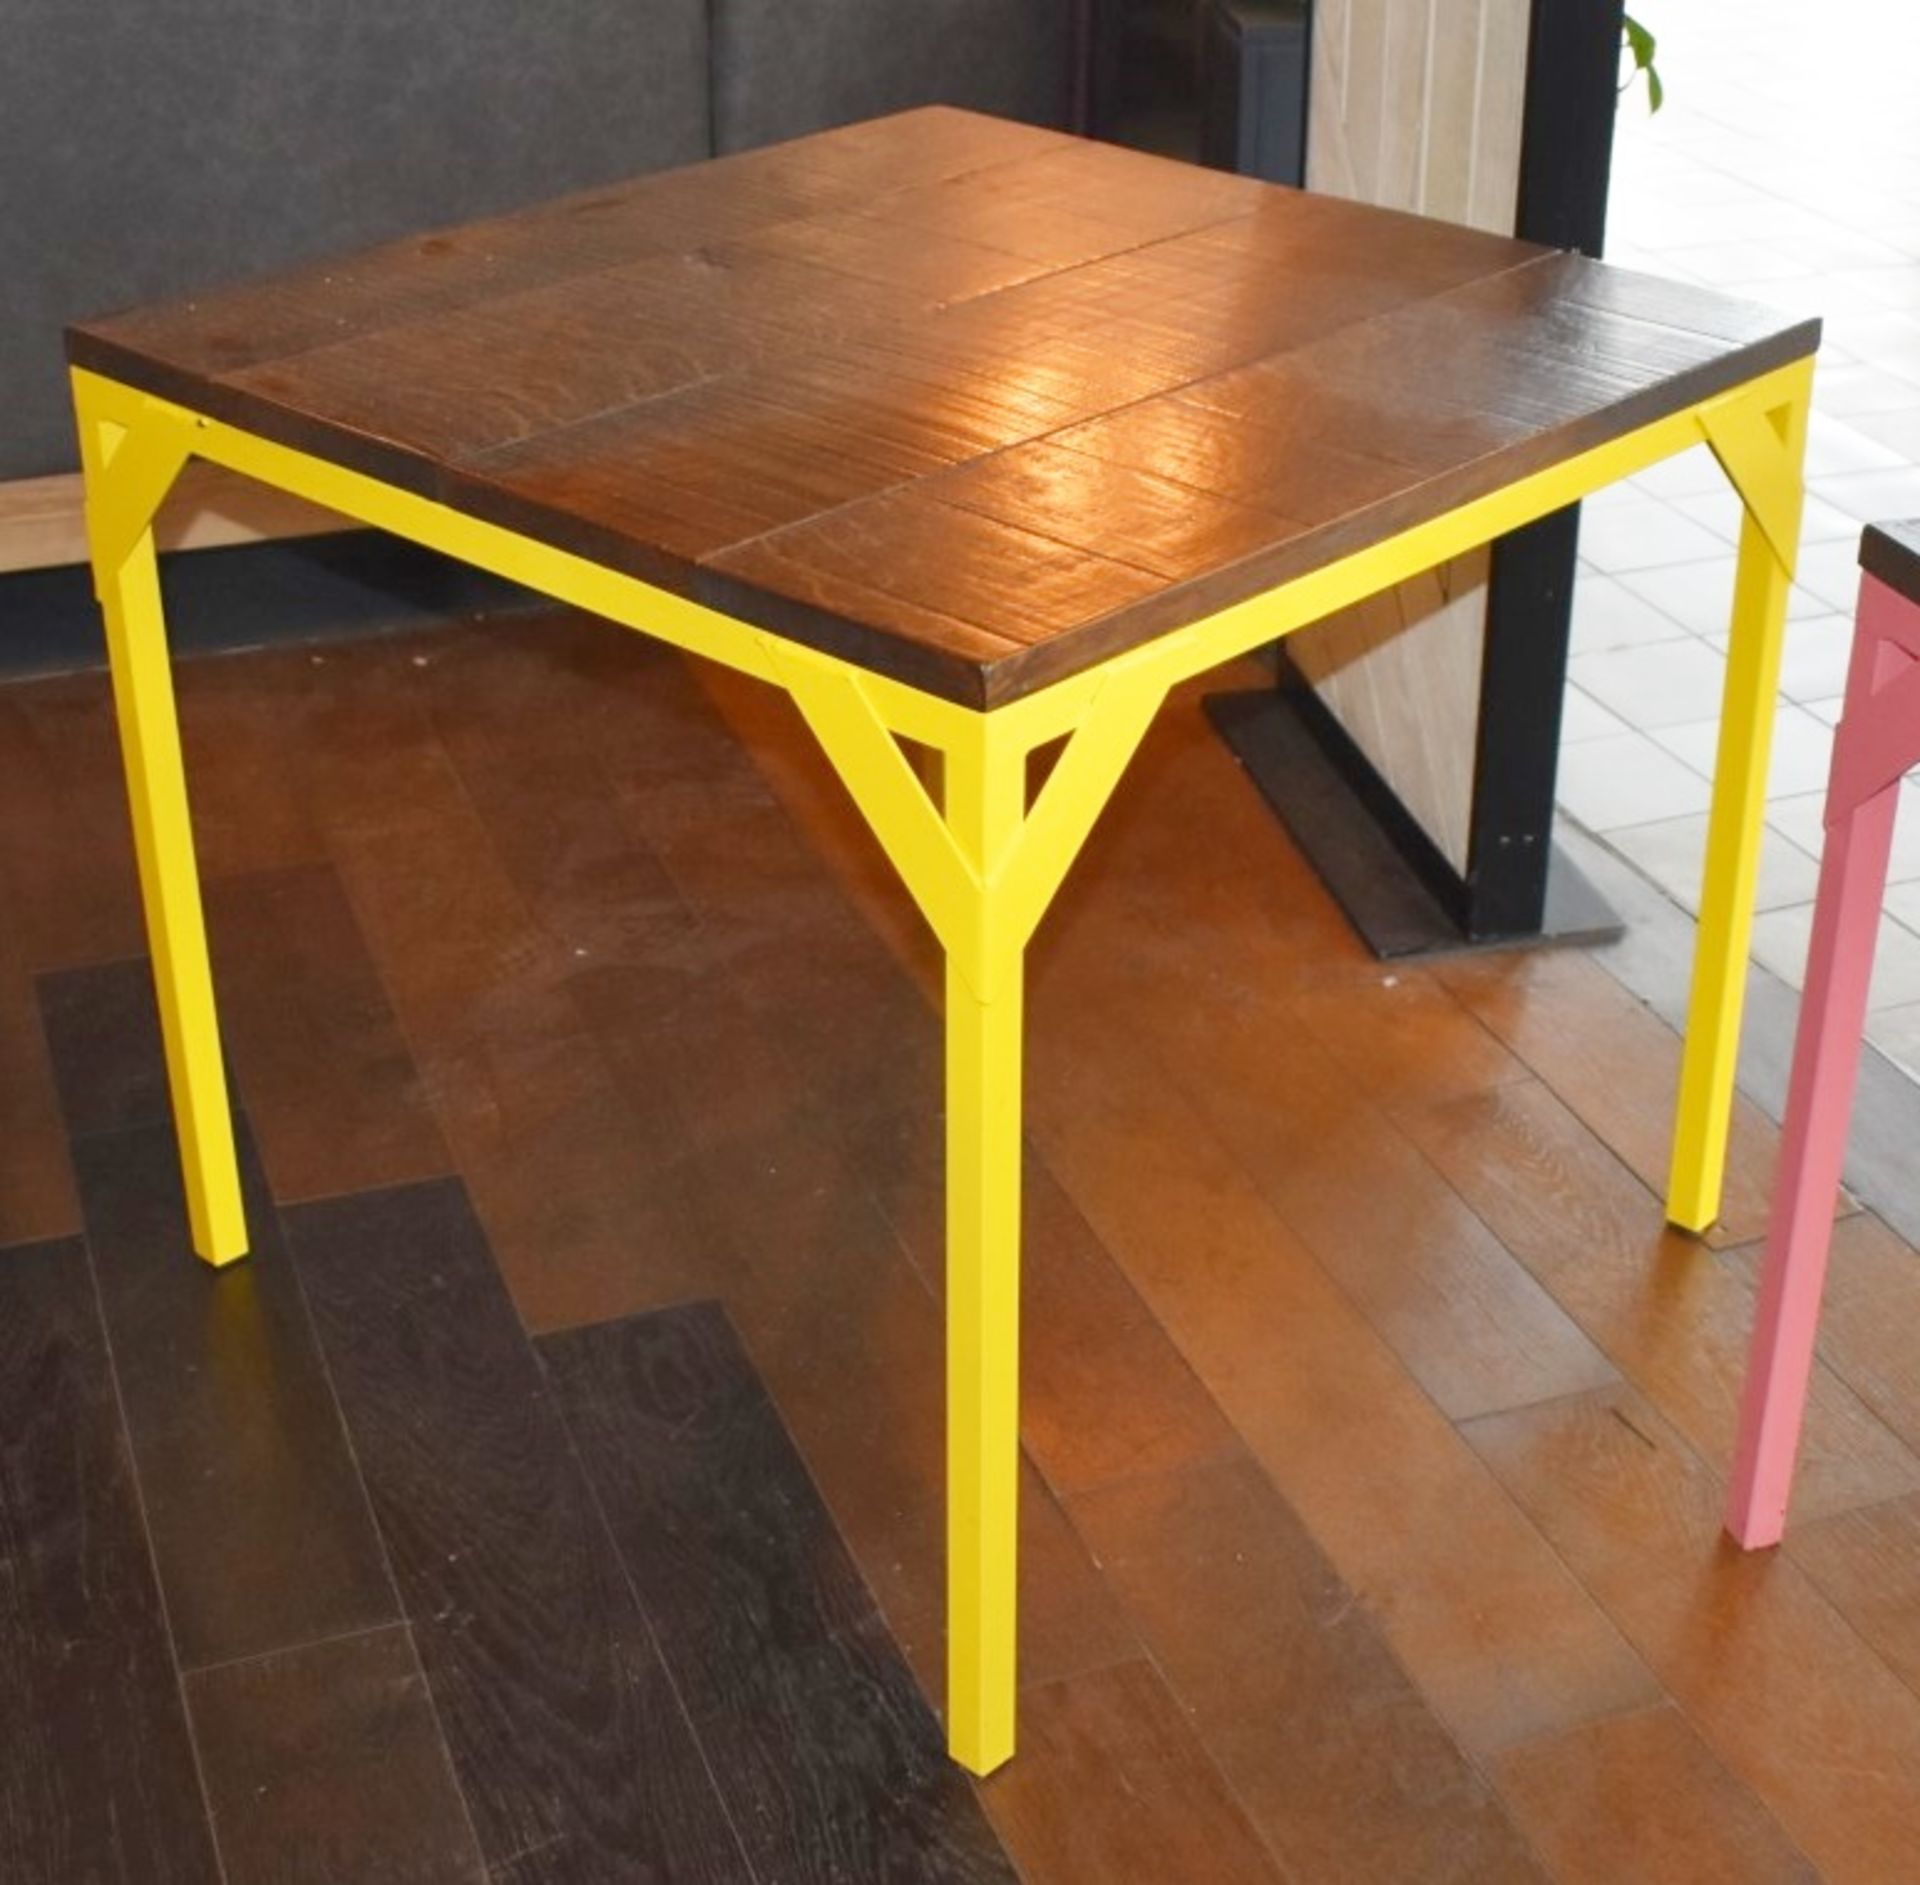 2 x Dining Tables With Bright Yellow Steel Bases and Wooden Panelled Tops - Size: H77  W85 x D85 cms